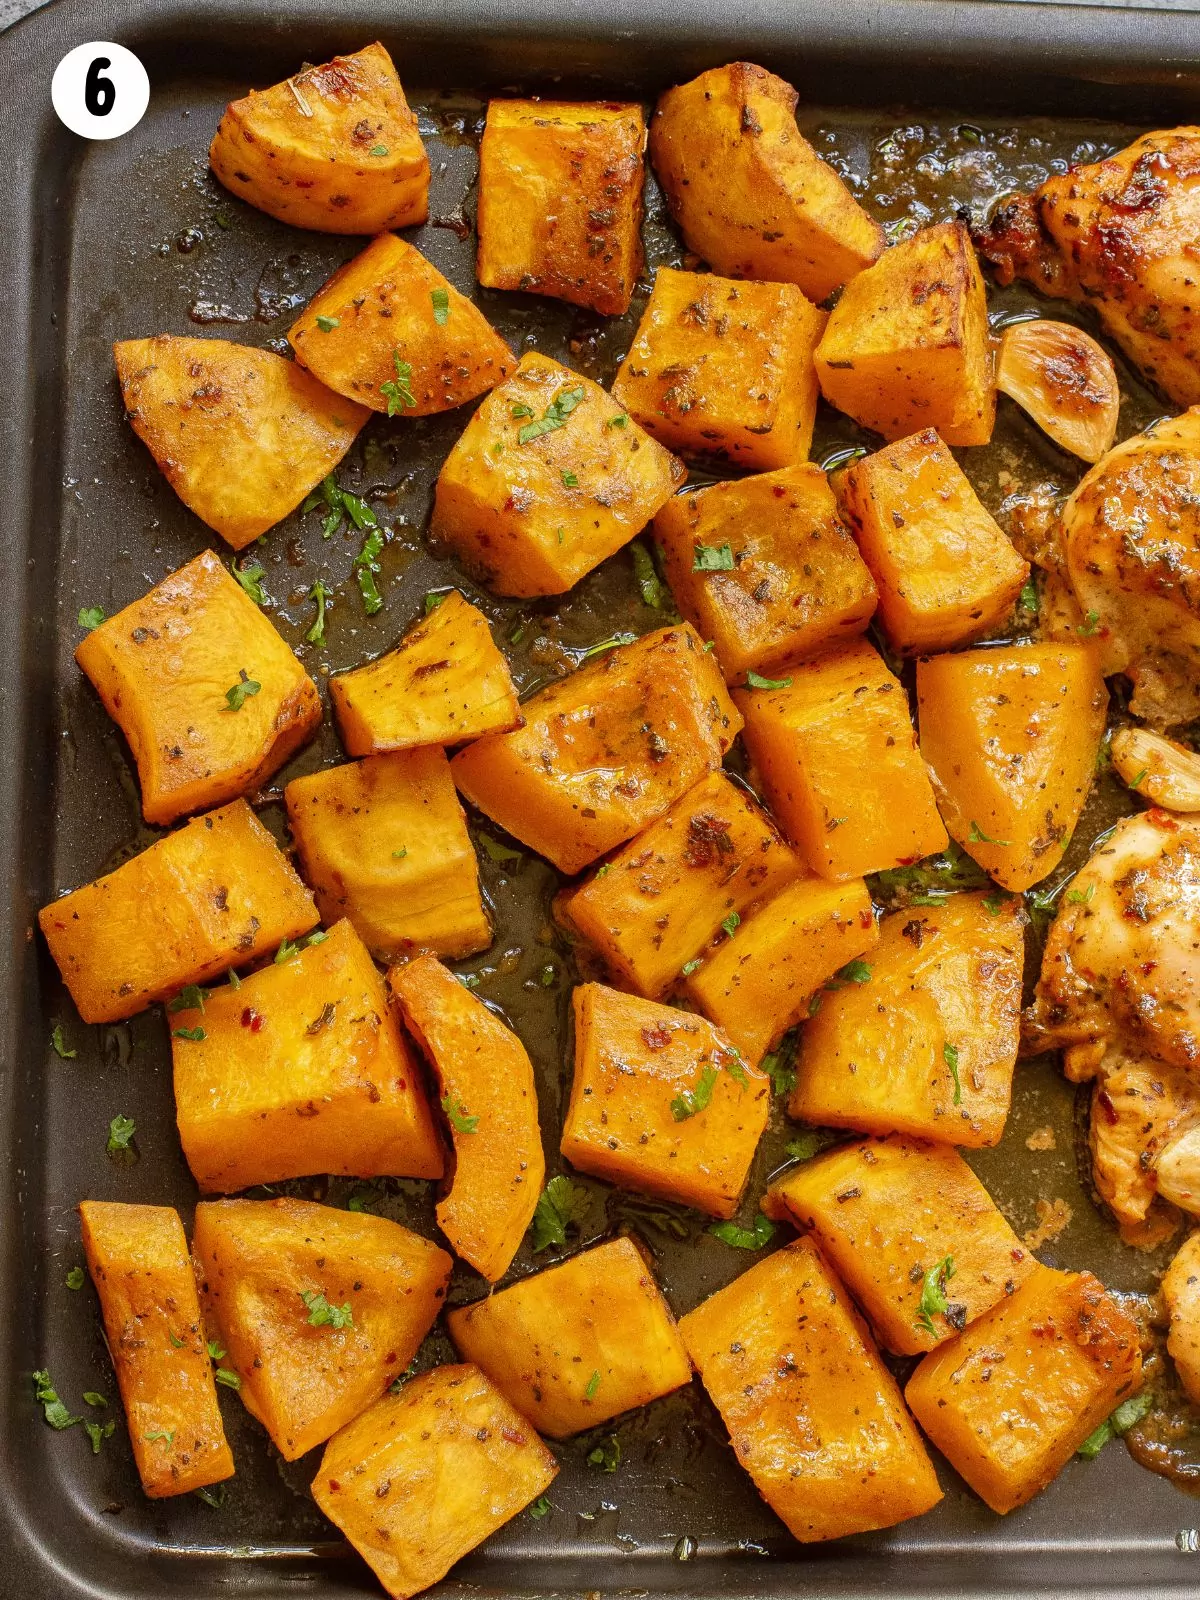 roasted butternut squash cubed on baking tray.